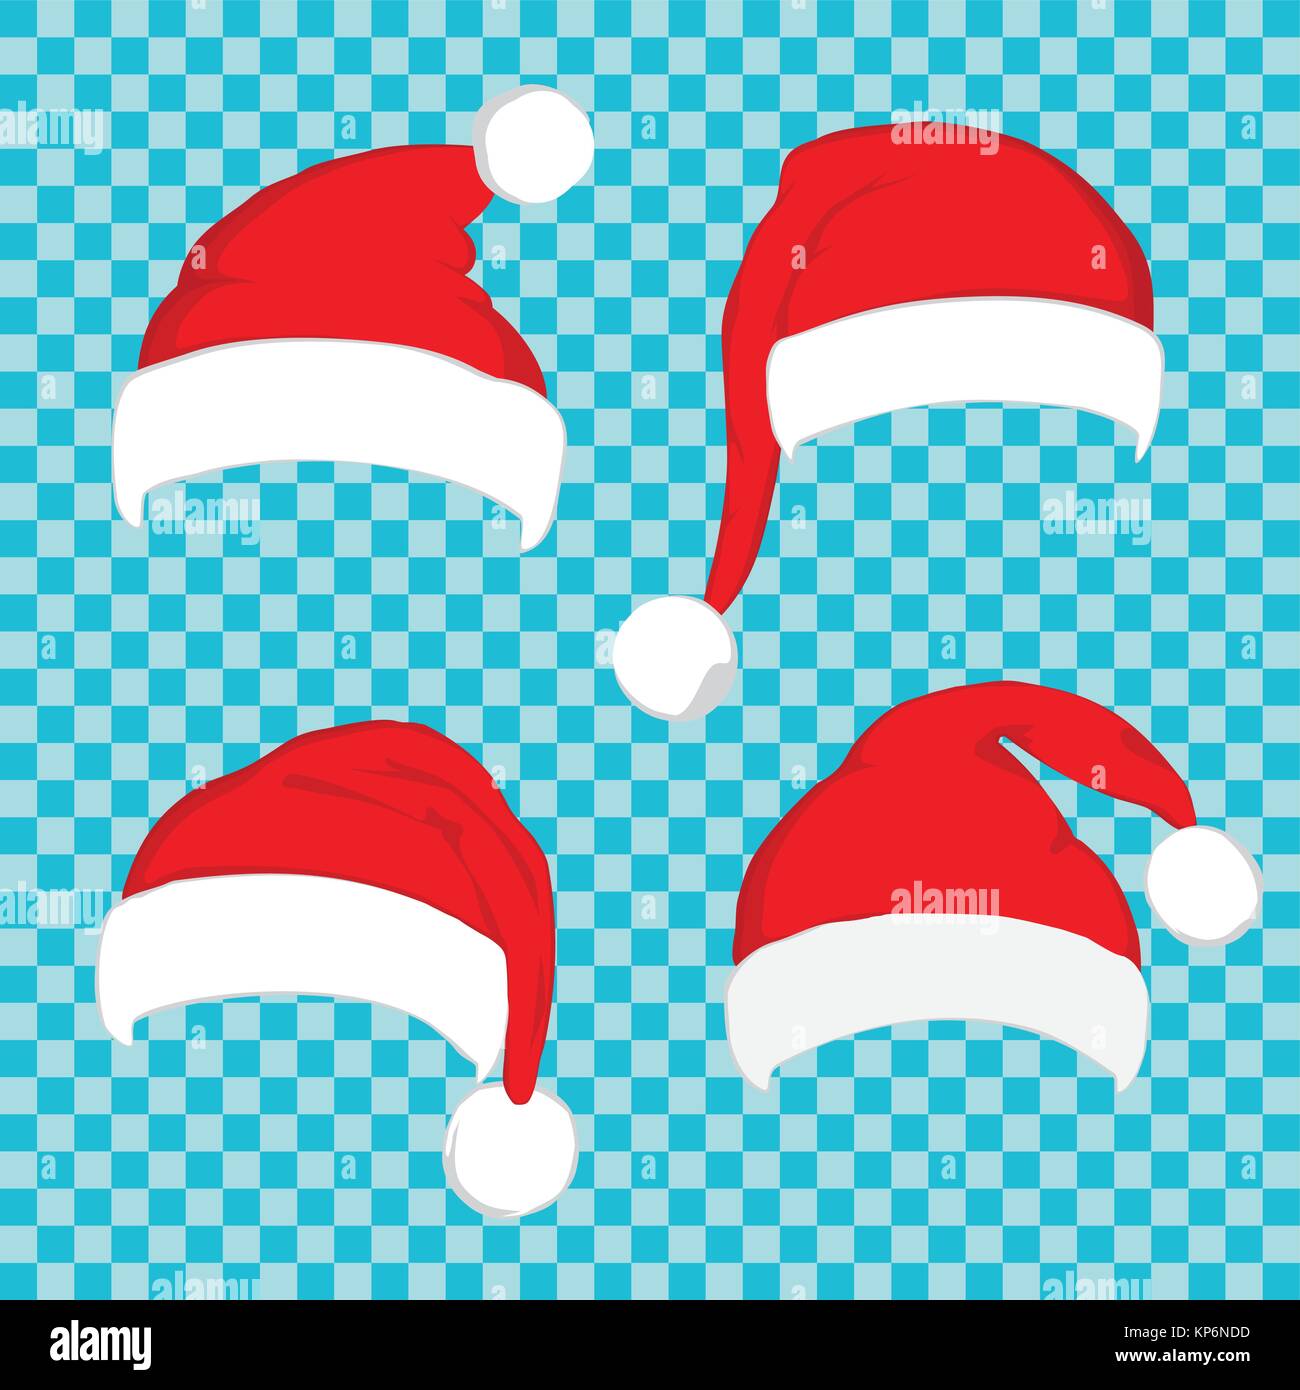 Santa Claus red hat set on white Stock Vector